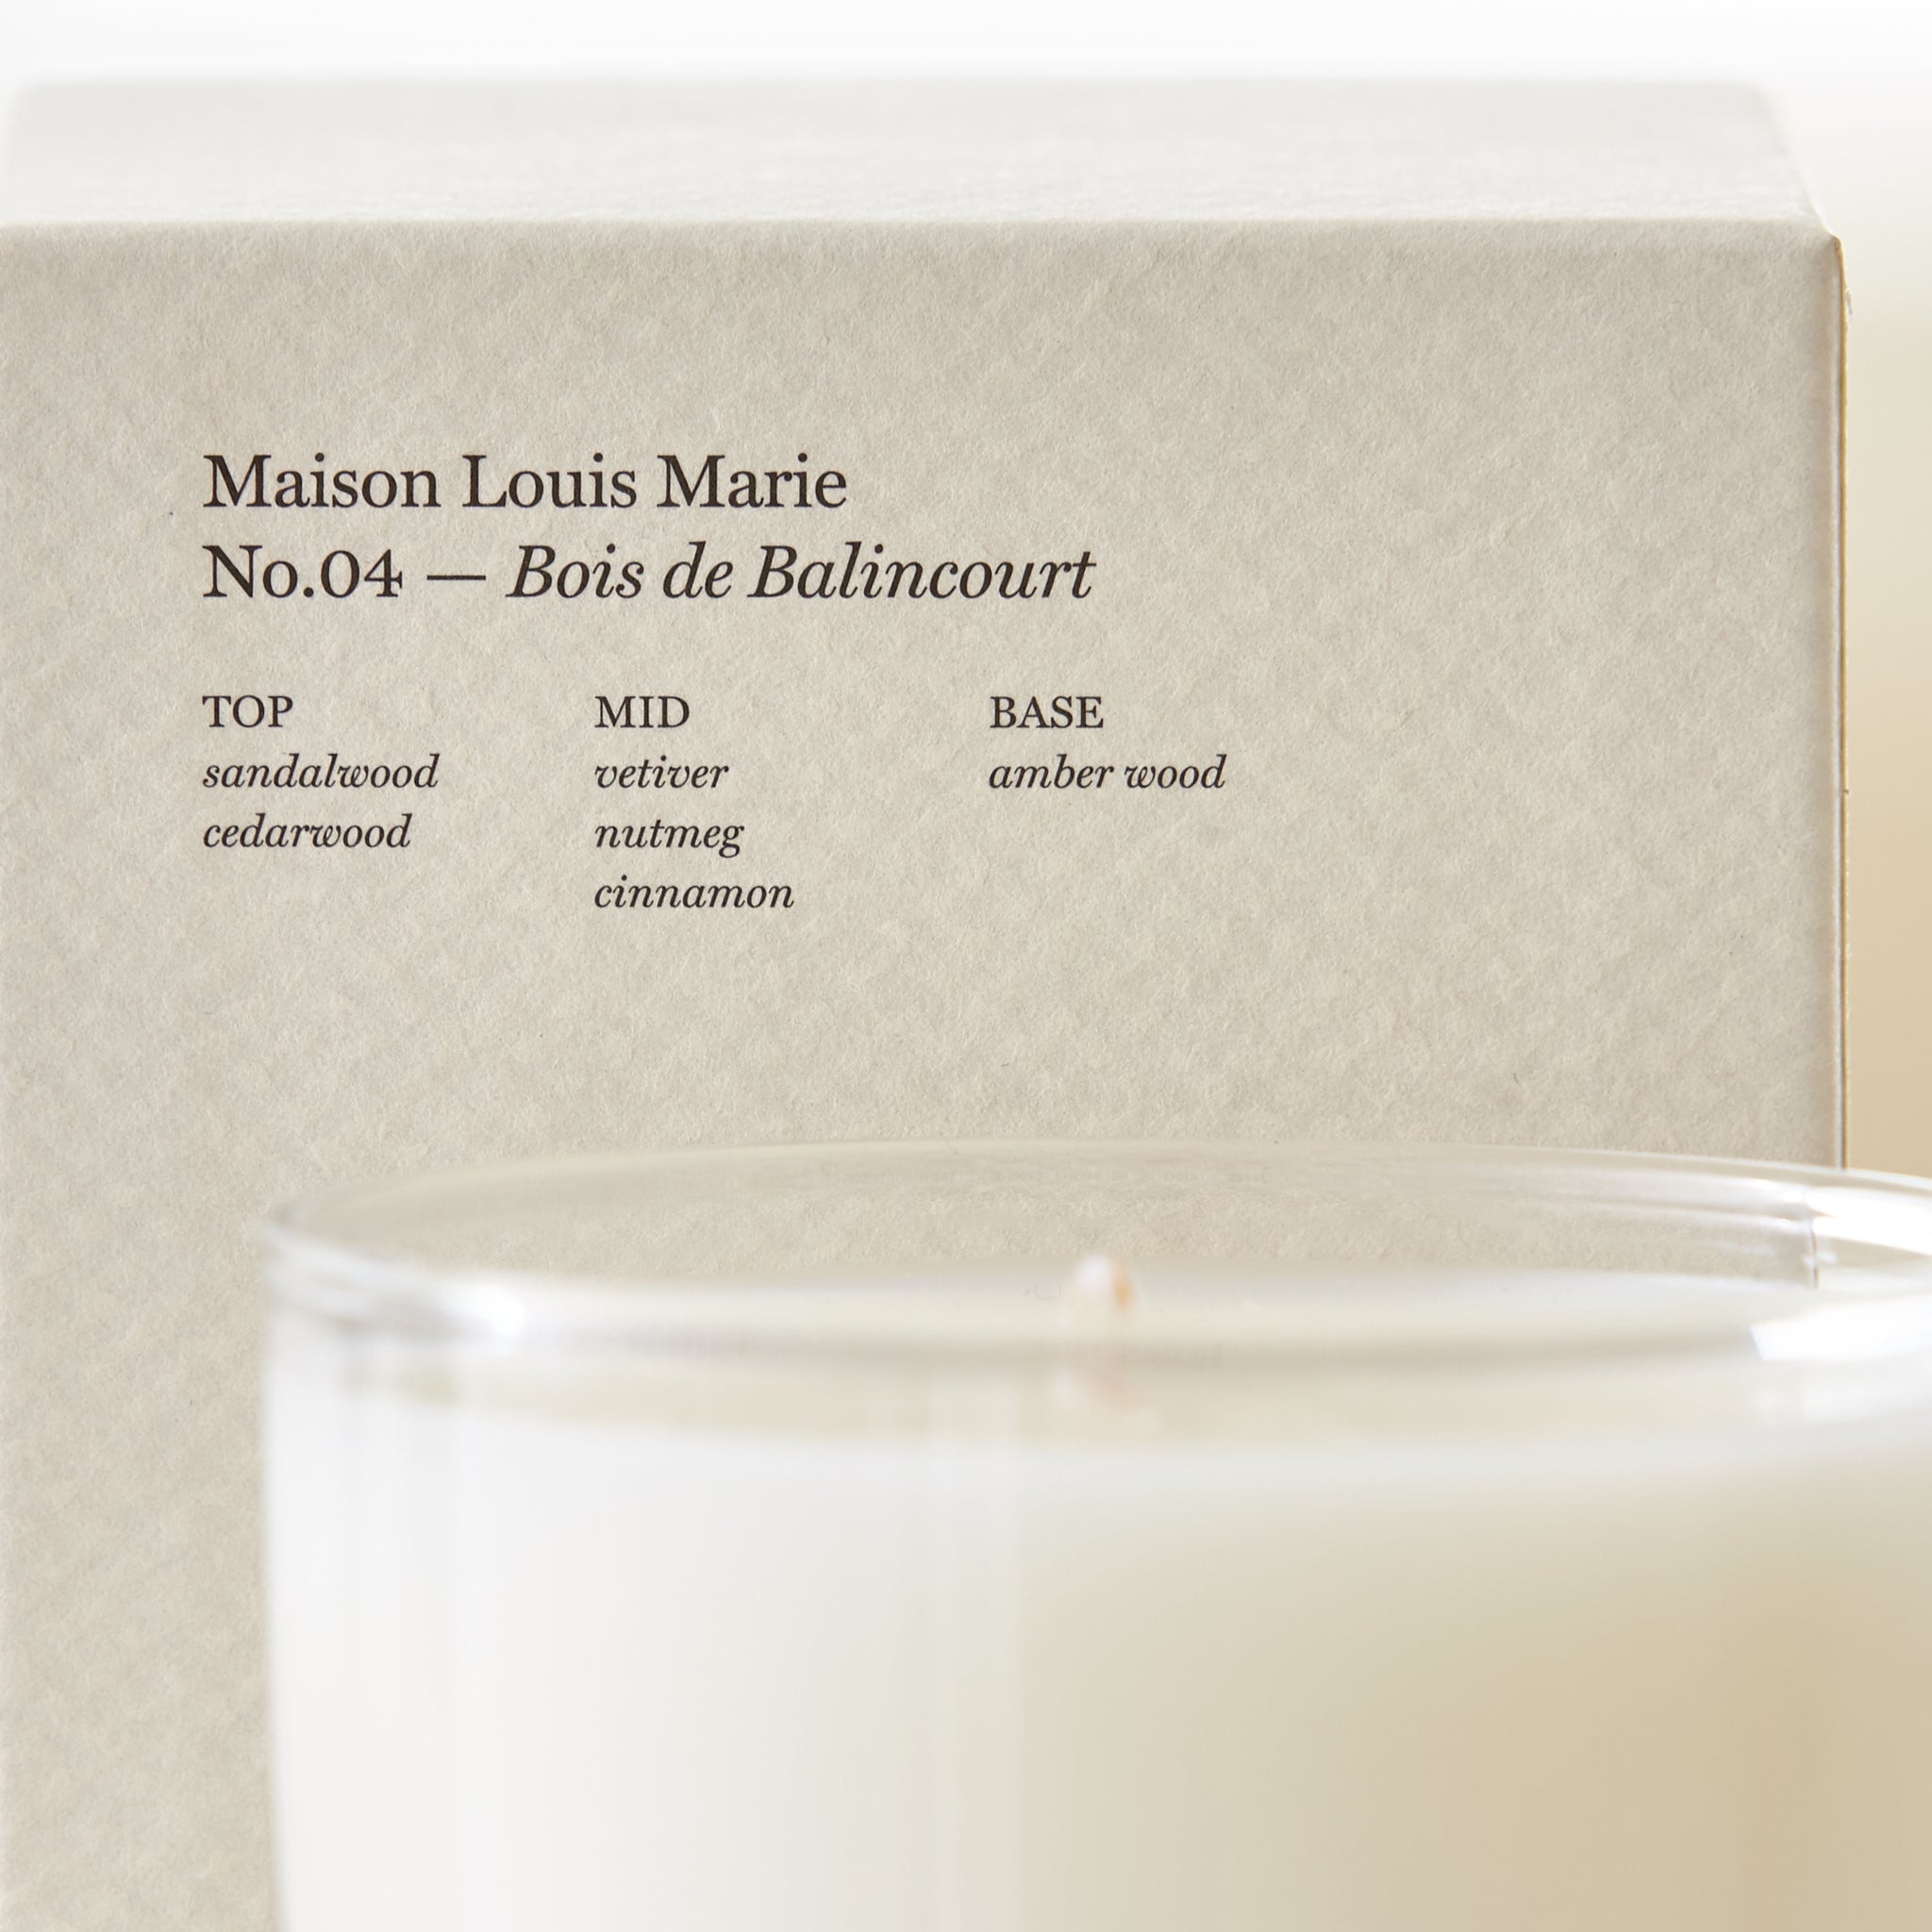 Maison Louise Marie - Cassis Candle in Portland, OR